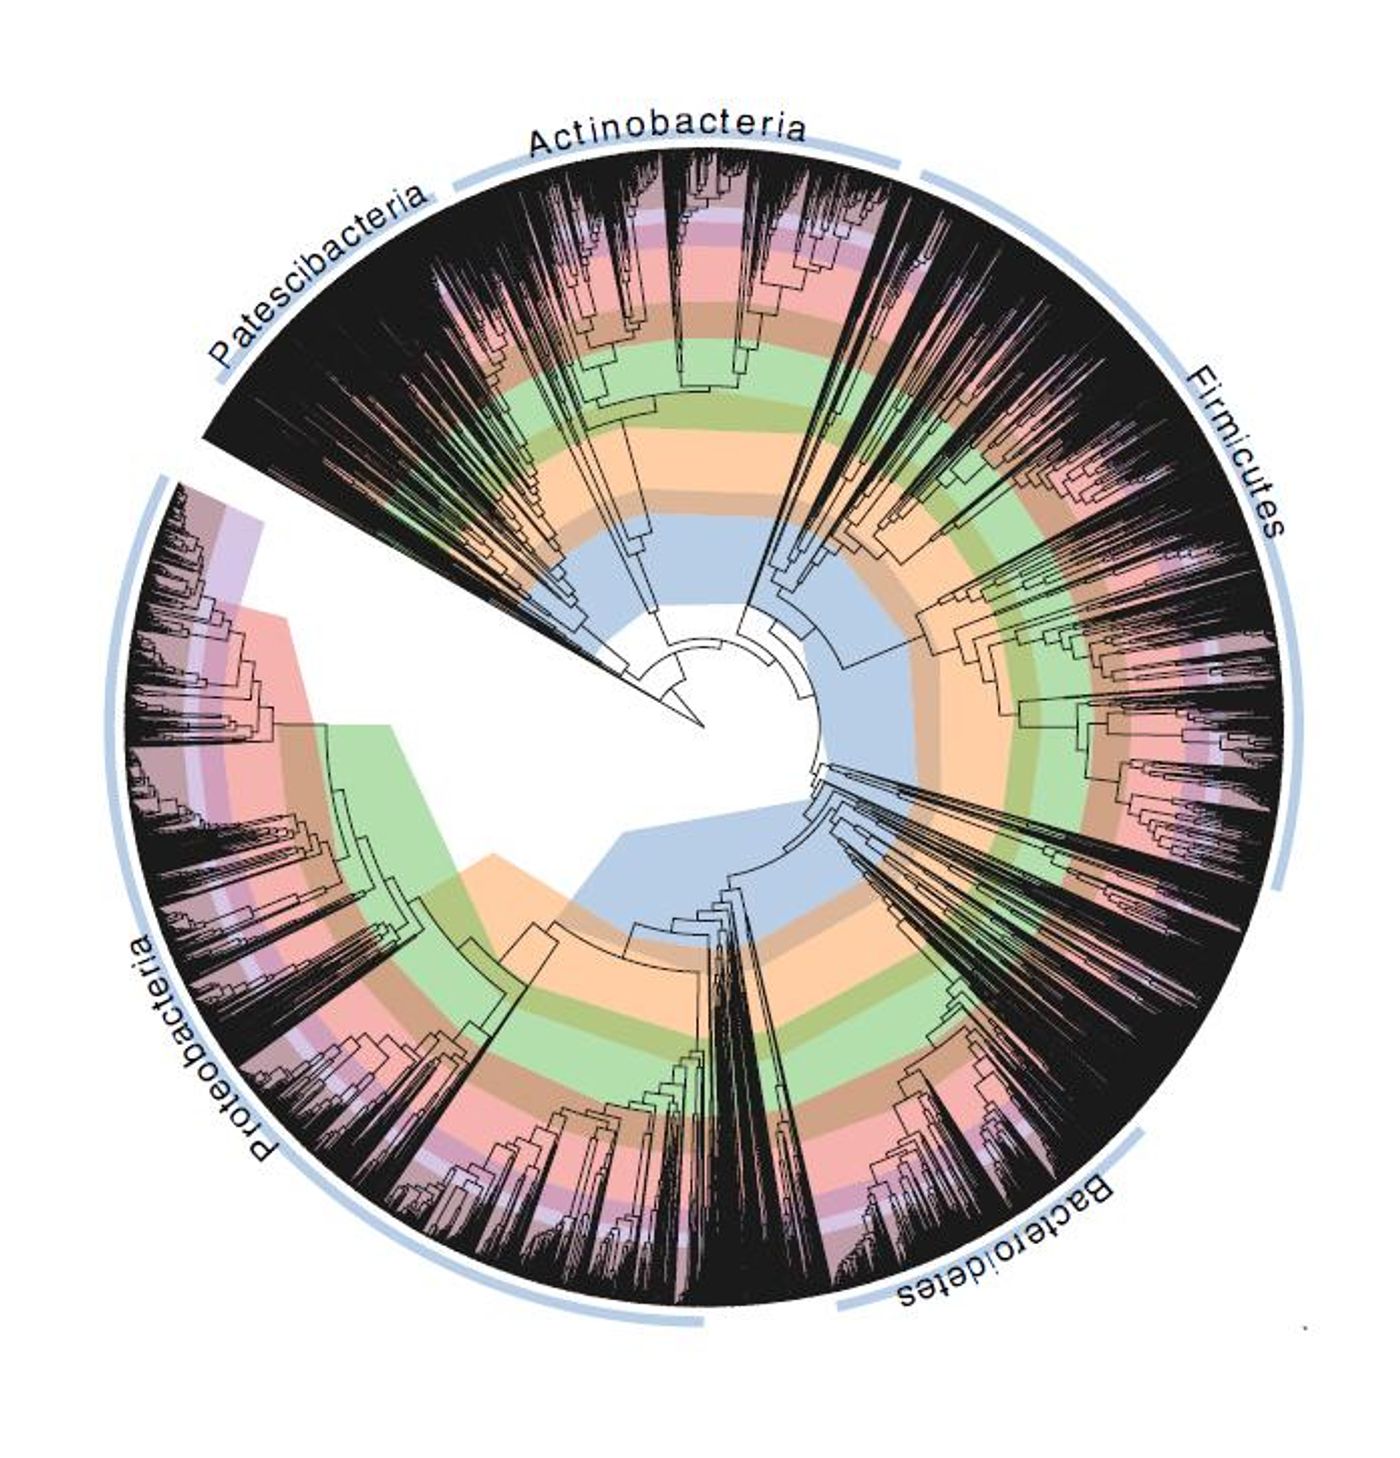 CAPTION The 'tree of life' for the bacterial world, bacteria's taxonomy in a phylogenetic tree. / Credit: The University of Queensland